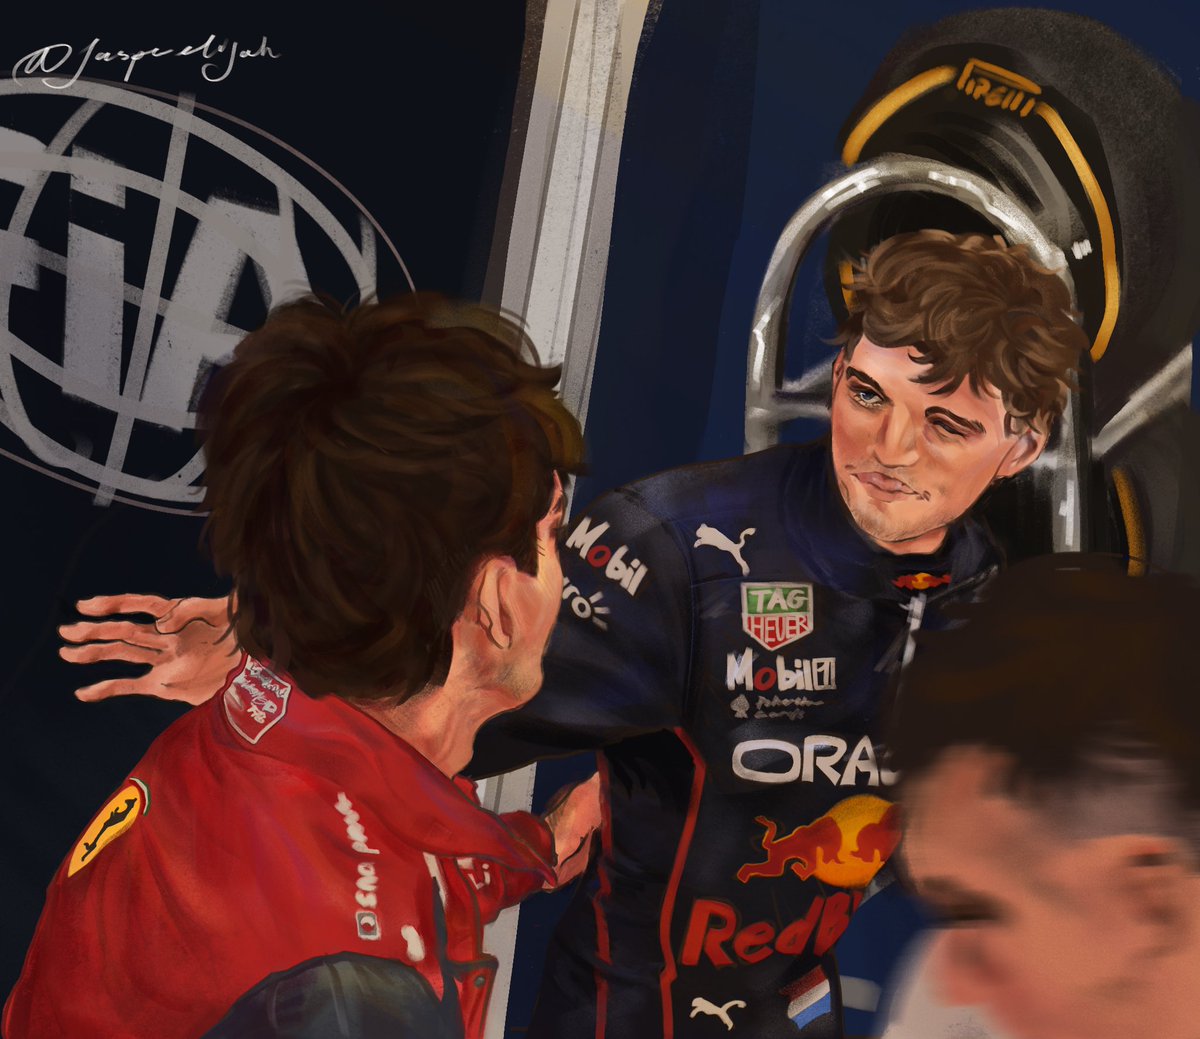 the way you look at me #lestappen #f1art